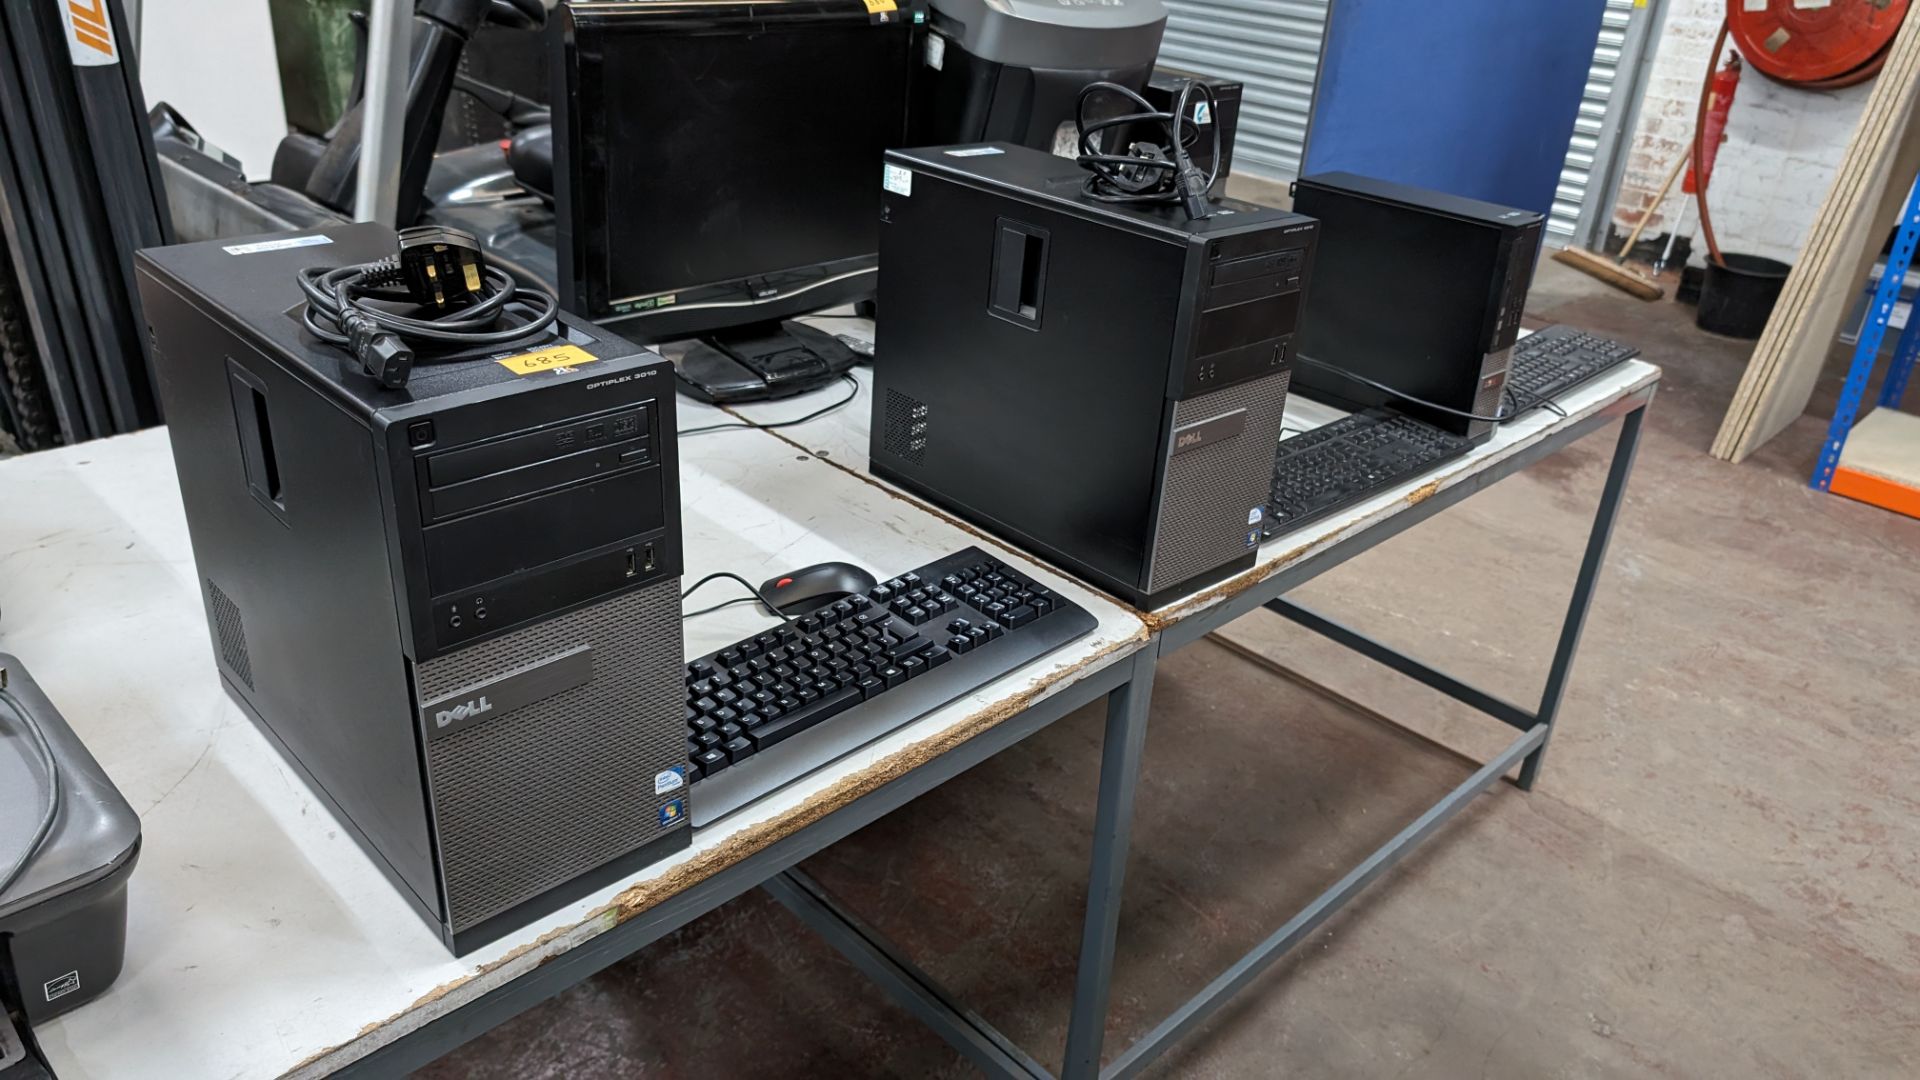 3 off desktop computers each including keyboard and mouse - Image 4 of 10